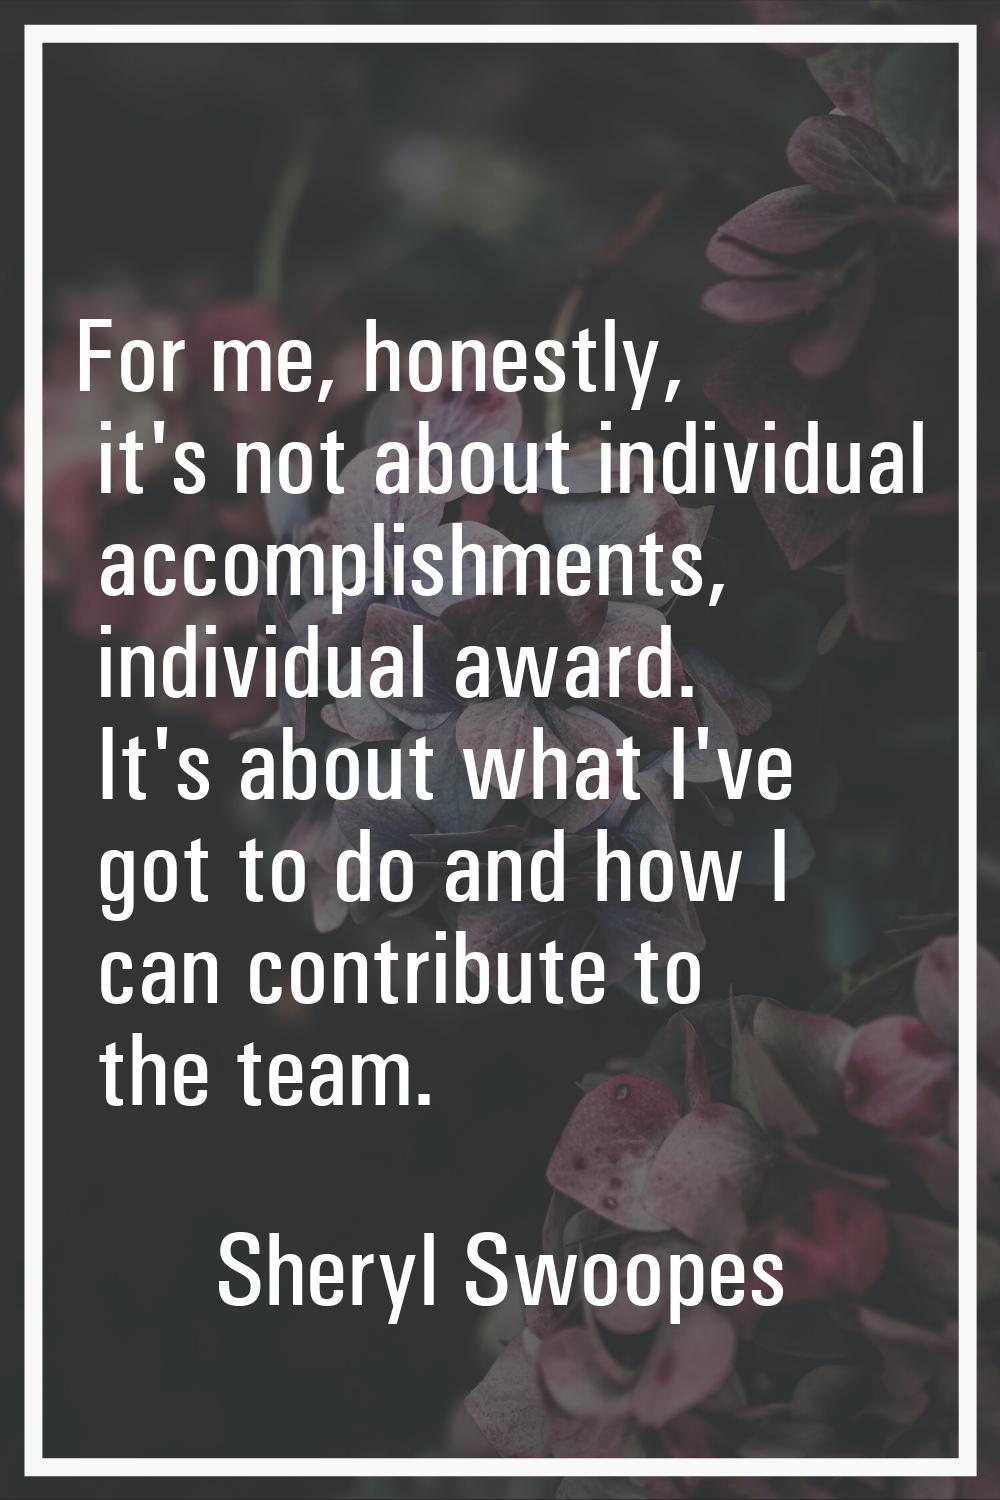 For me, honestly, it's not about individual accomplishments, individual award. It's about what I've